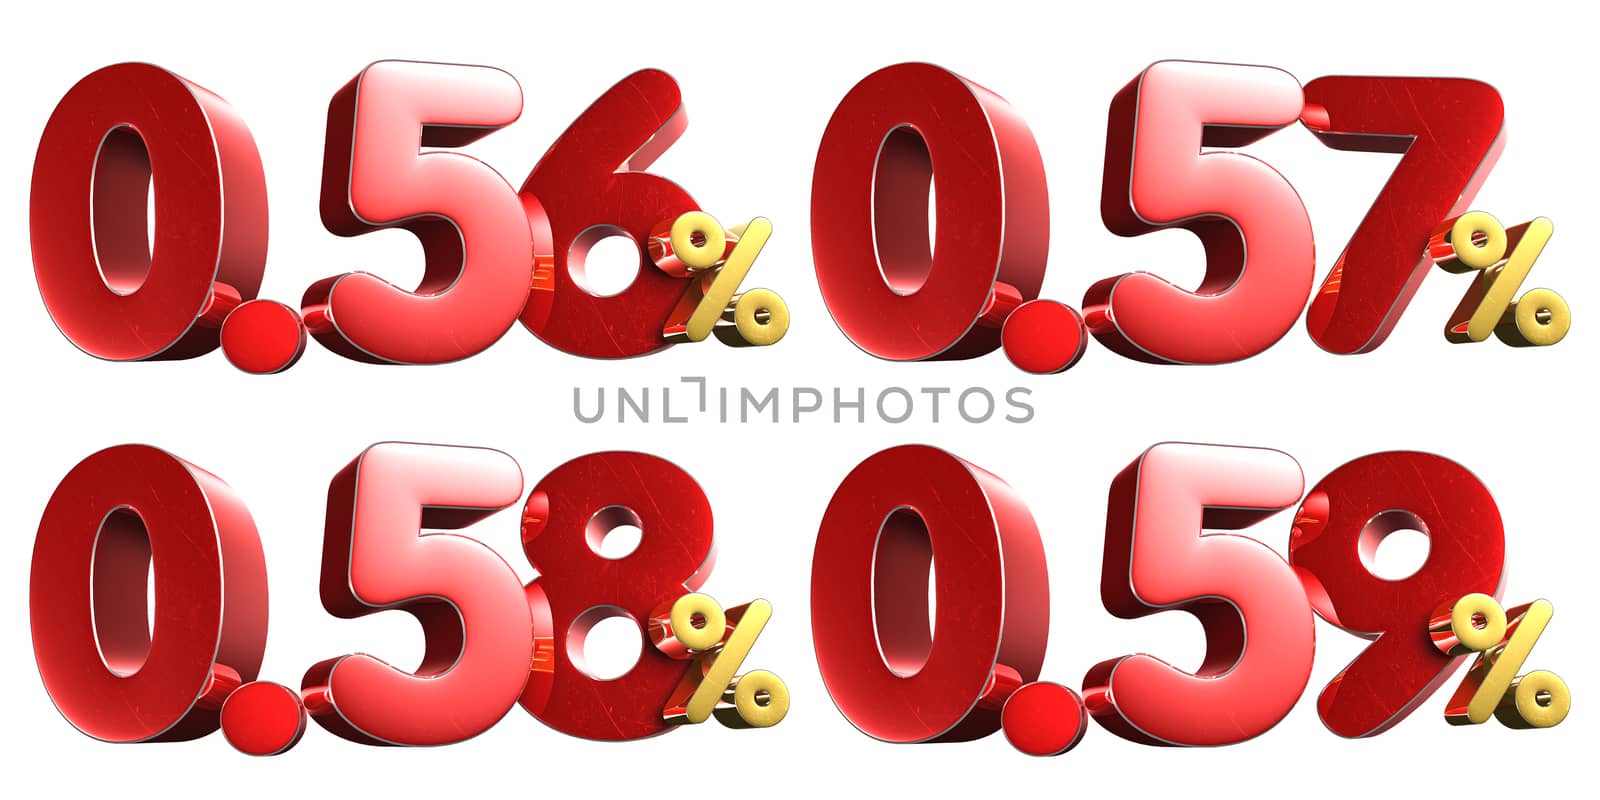 0.56,0.57,0.58,0.59 percent numbers 3D rendering on white background.Small size, about 8x19 cm.(with Clipping Path).